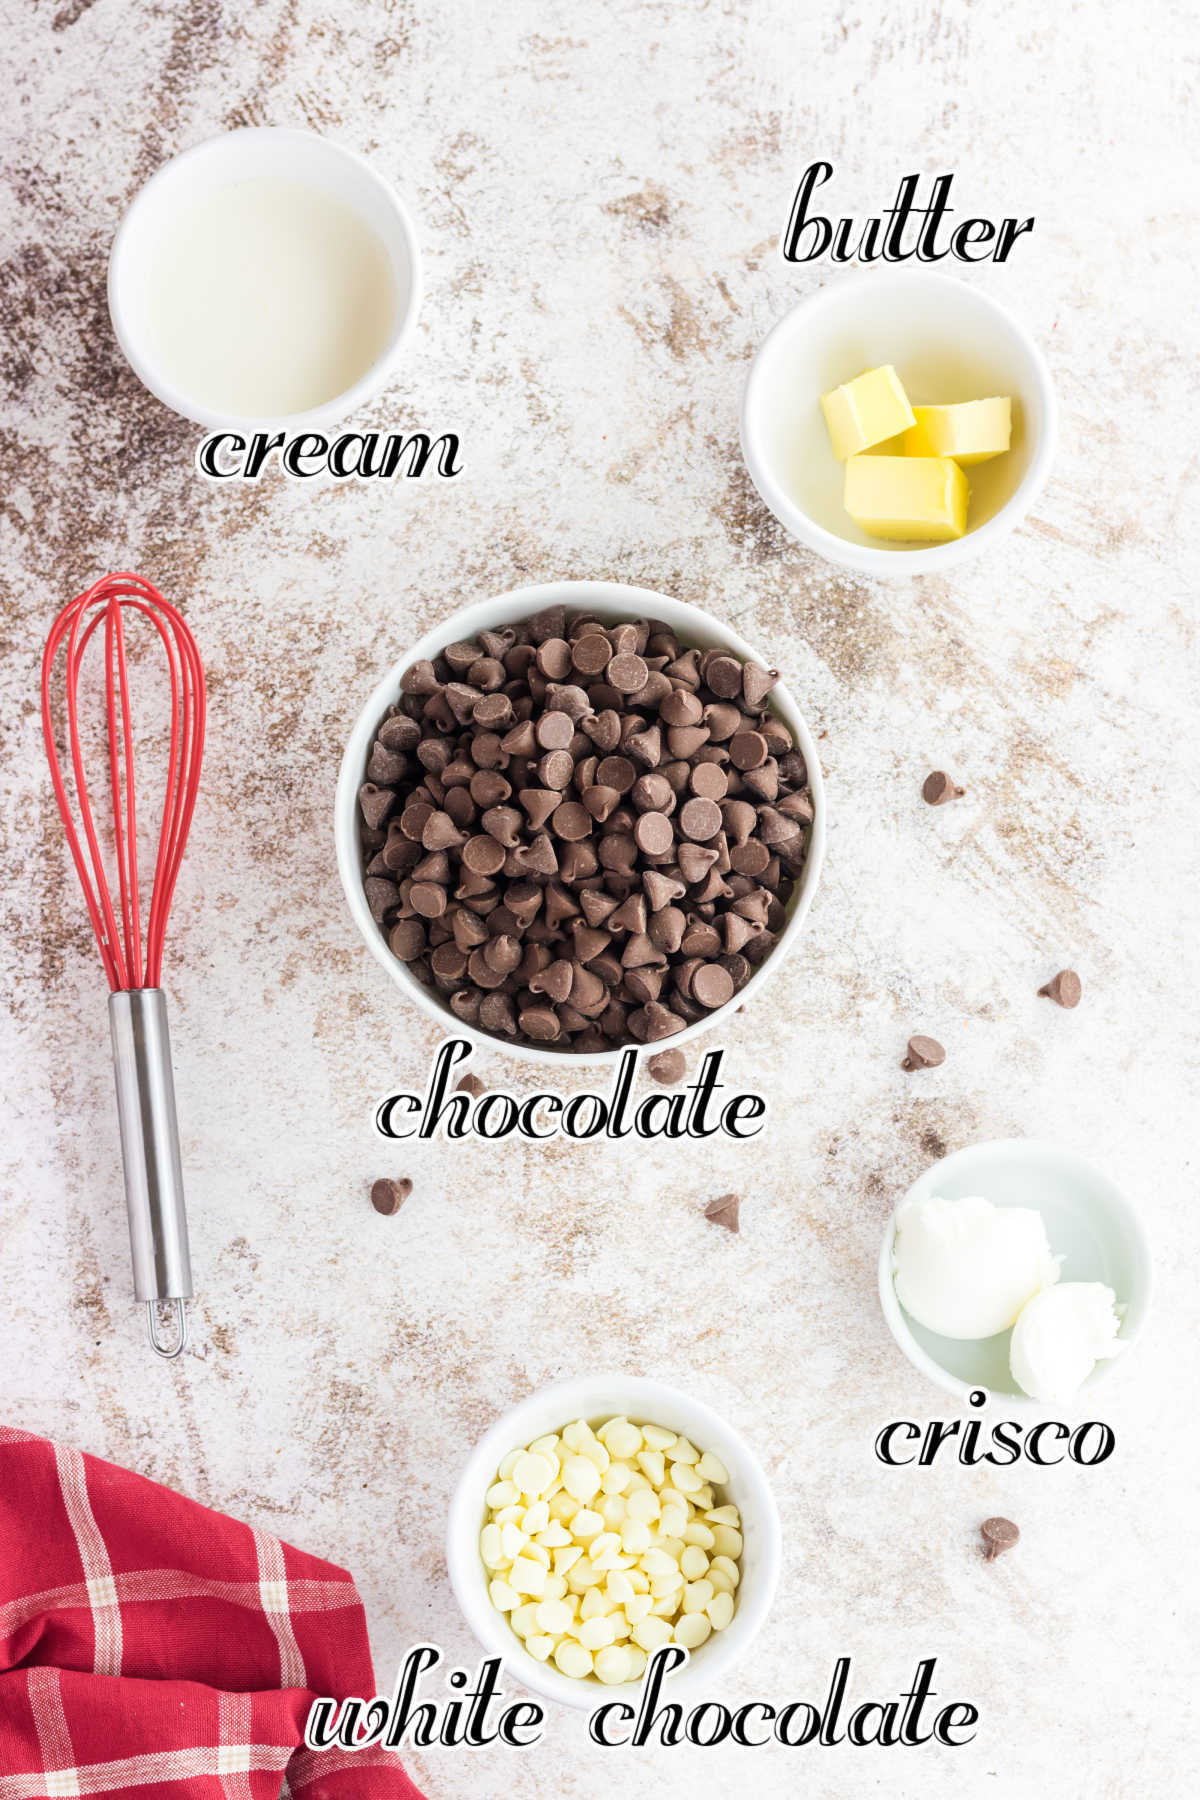 Labeled ingredients for chocolate truffles.